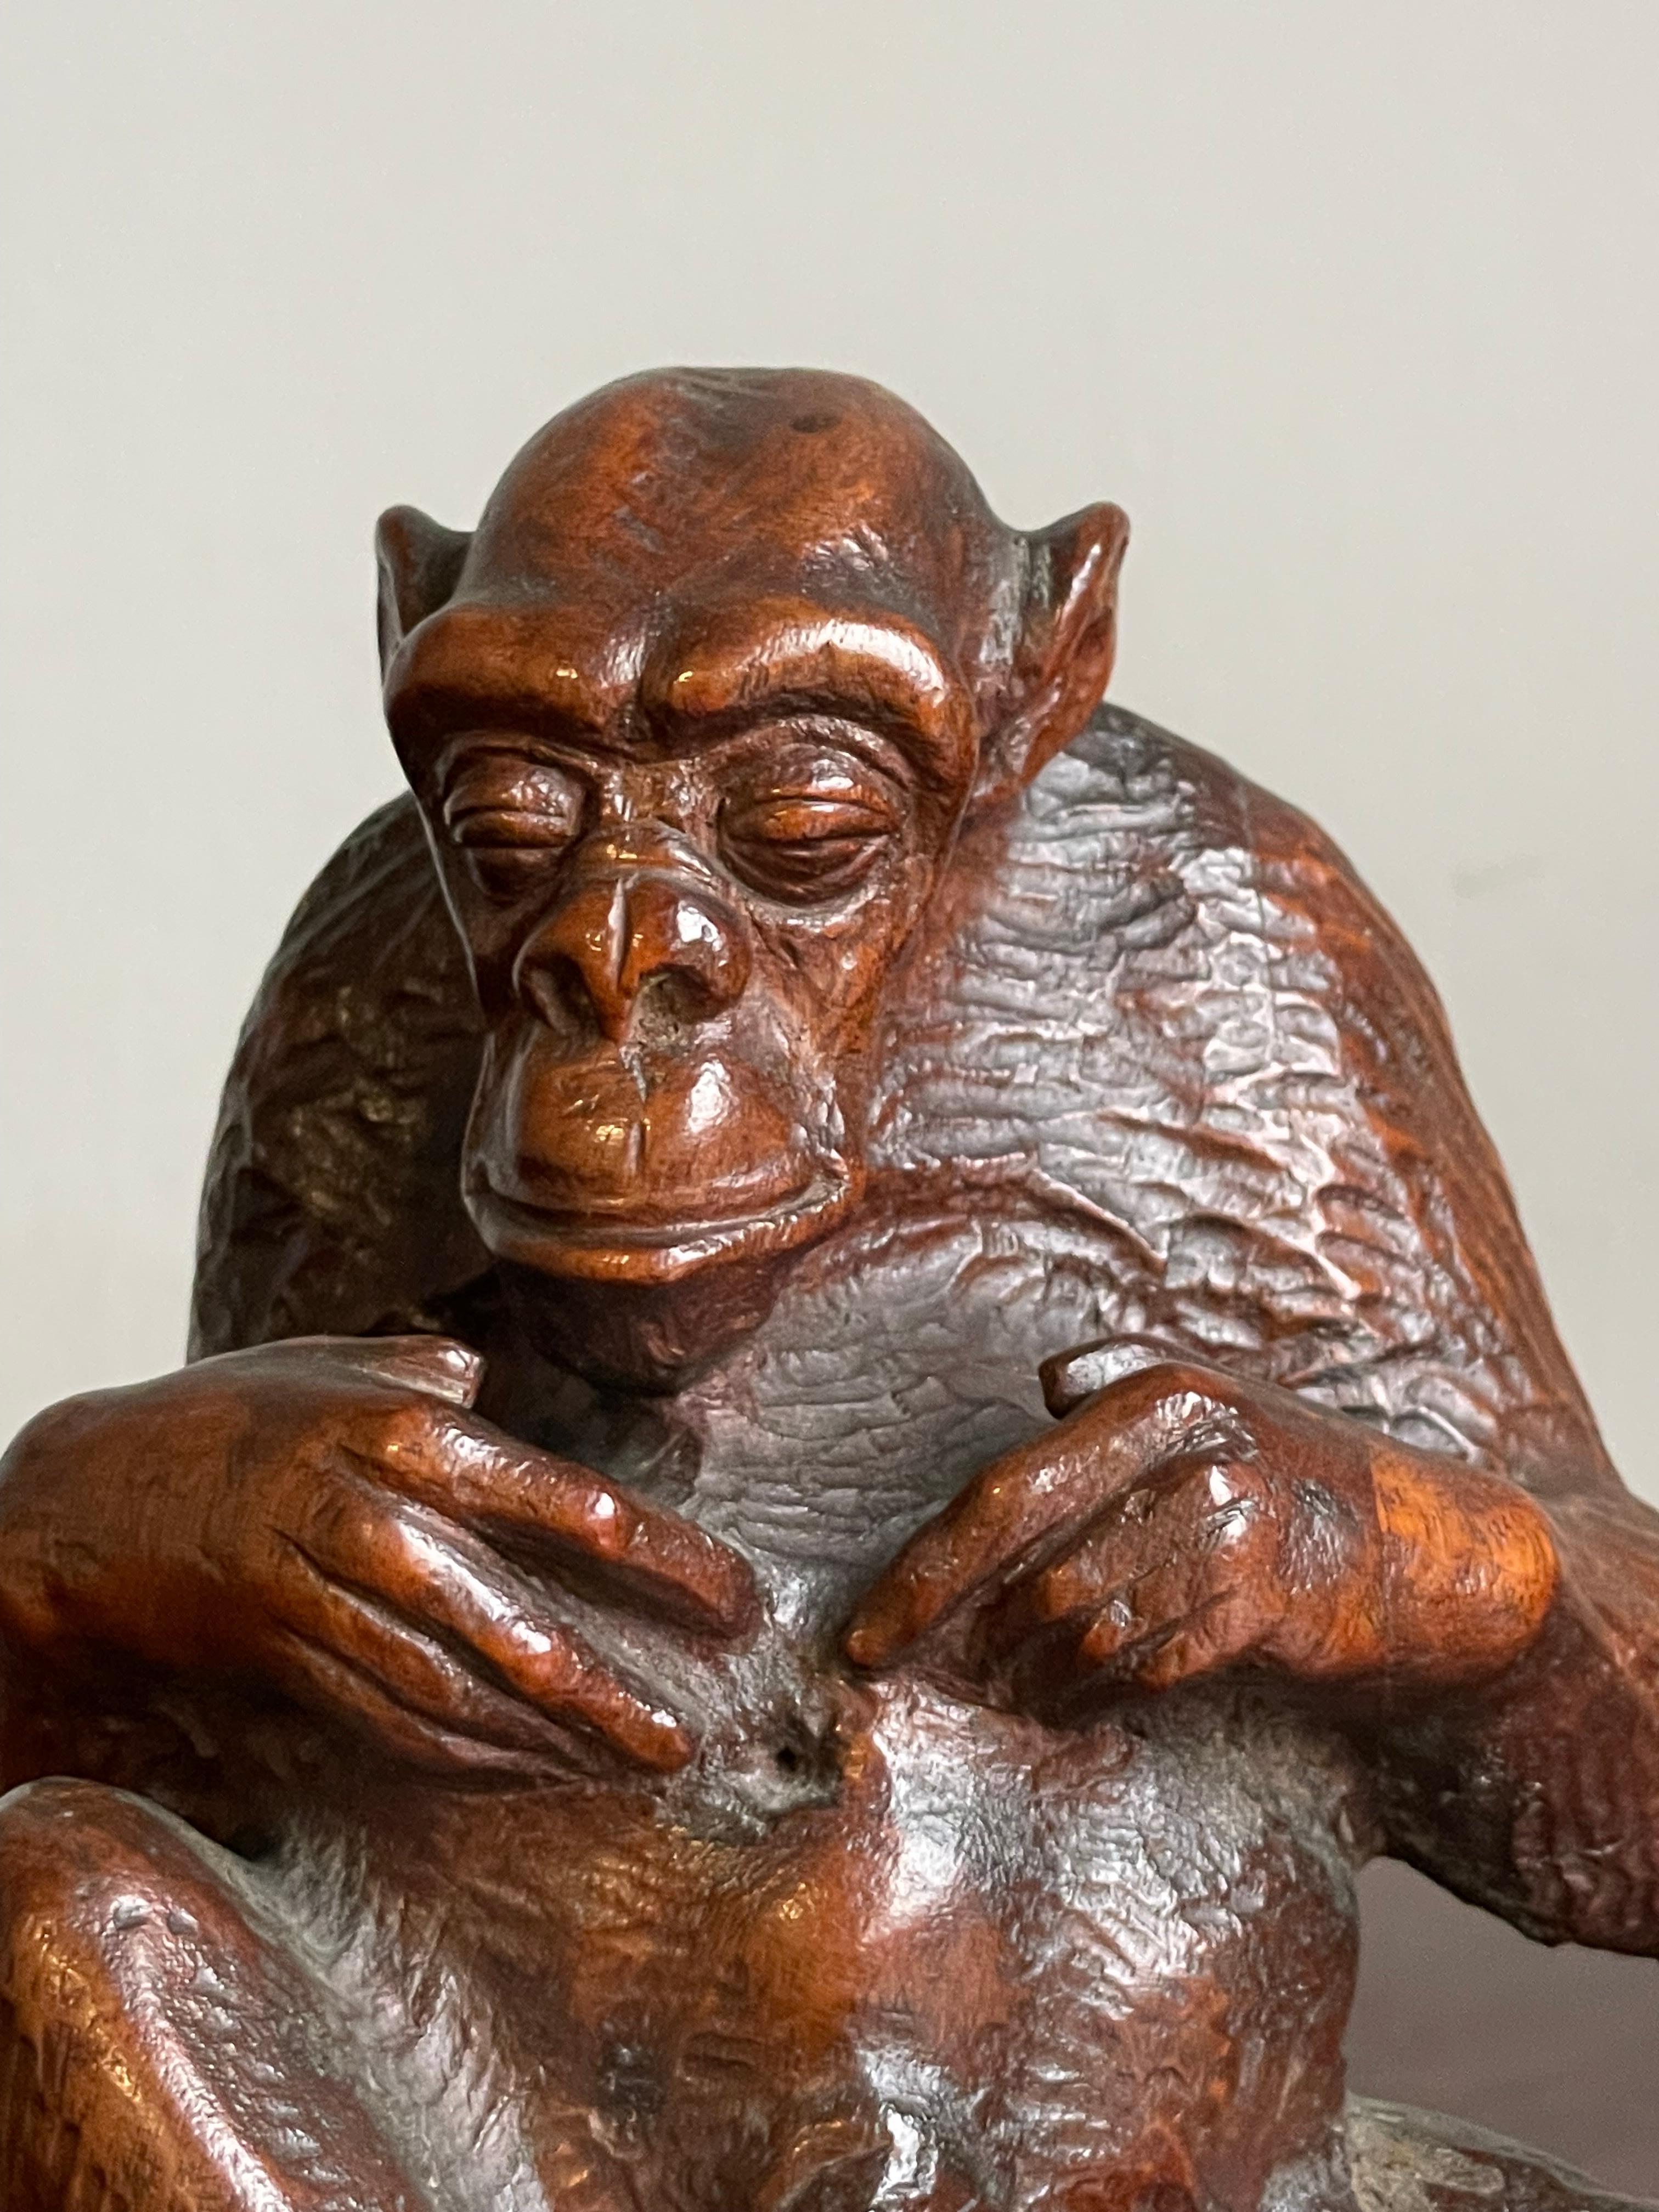 European Rare & Meaningful Antique Hand Carved Nutwood, Navel Gazing Chimpanzee Sculpture For Sale